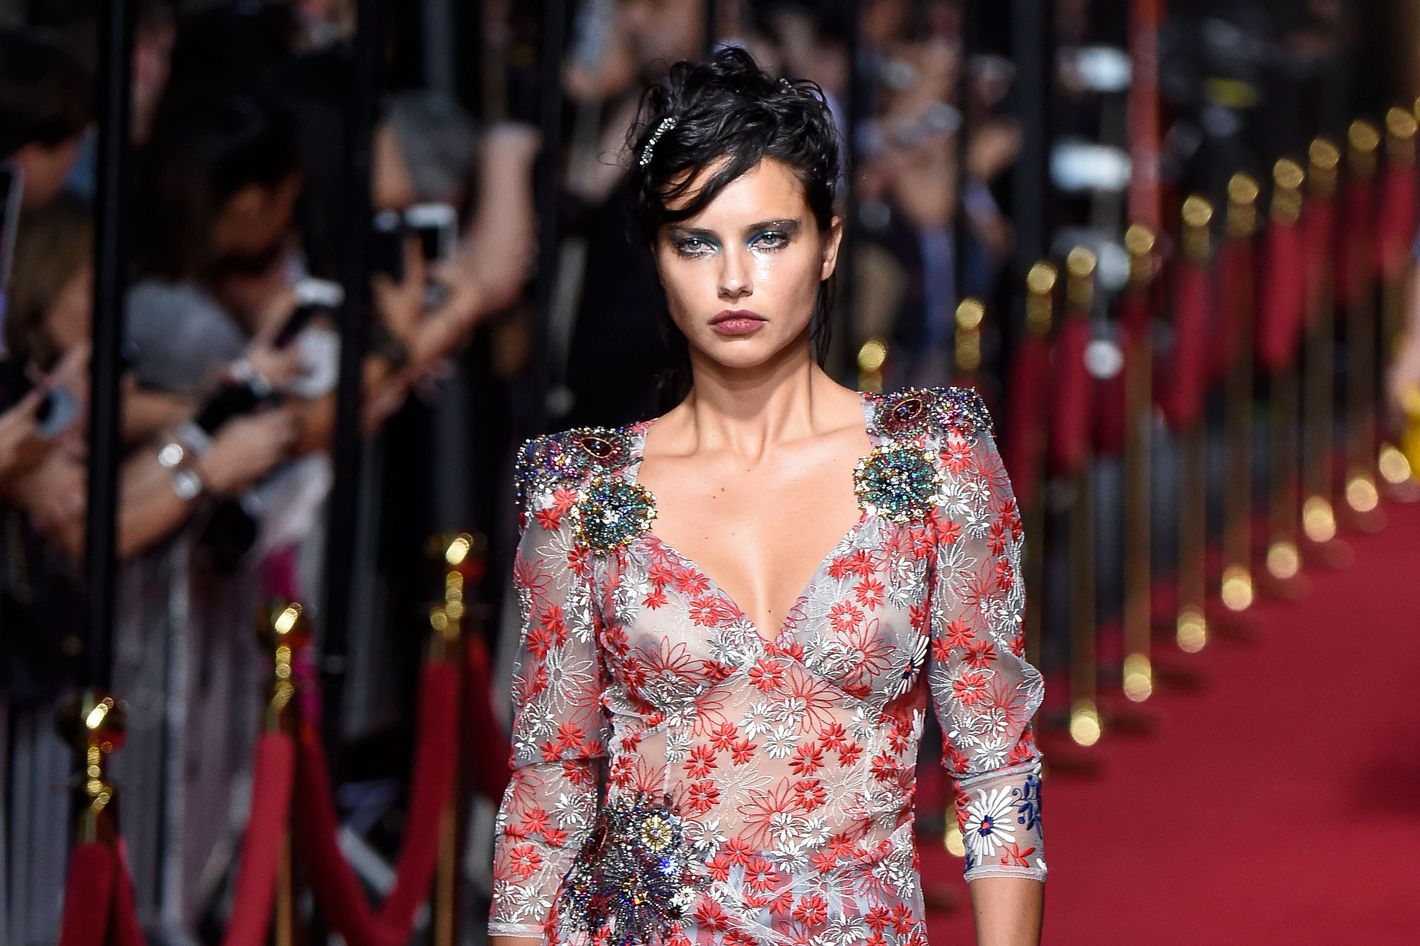 Adriana Lima's Best Fashion And Red Carpet Moments